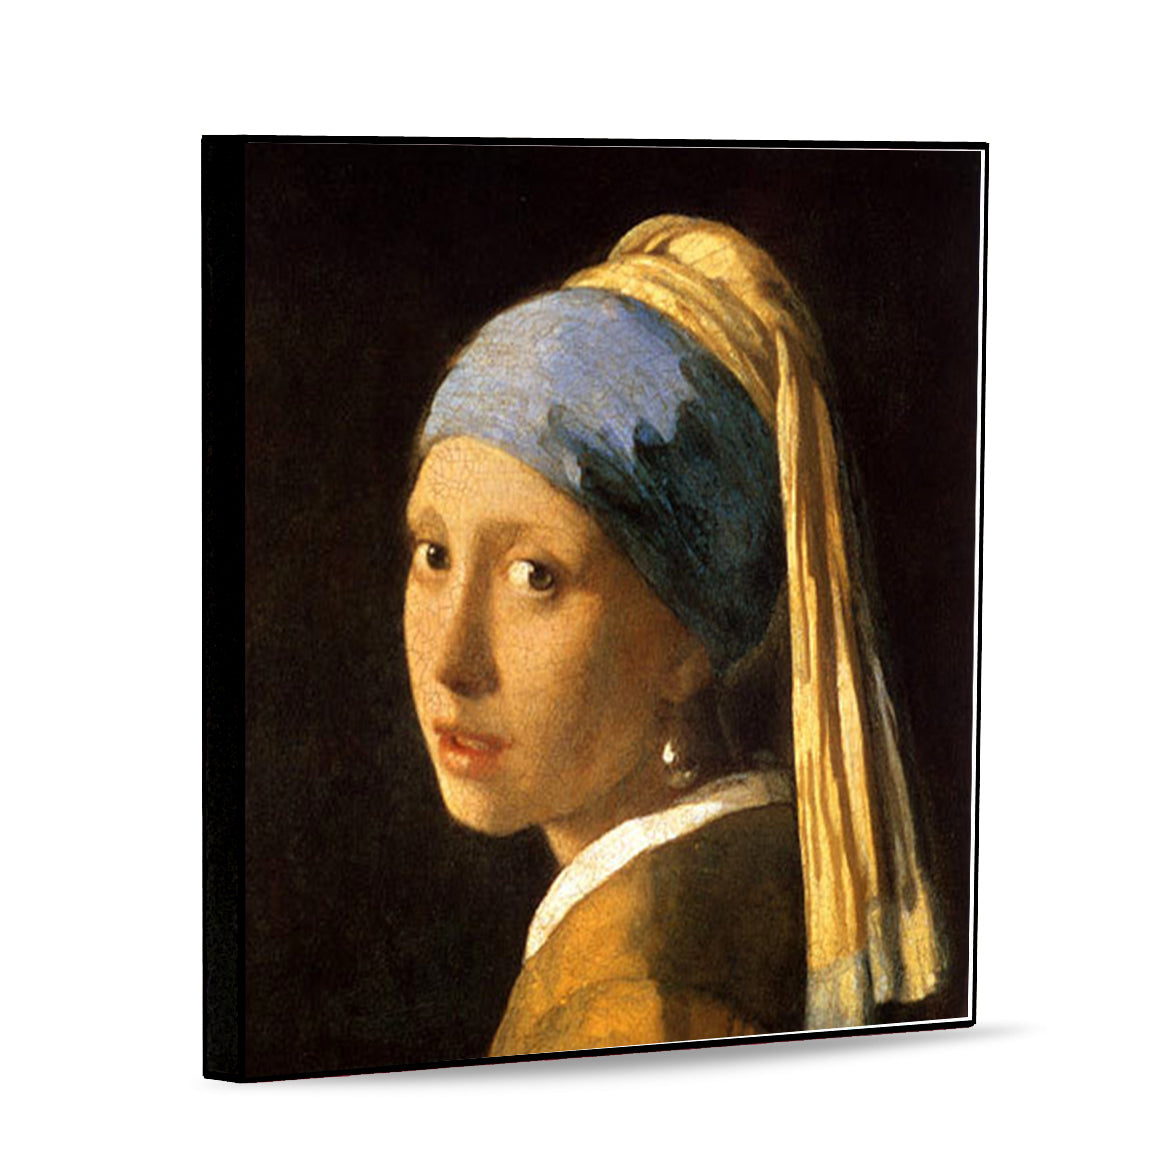 AFFRESCO: Panel Tile - Opera "Girl with a Pearl Earring" by Johannes Vermeer